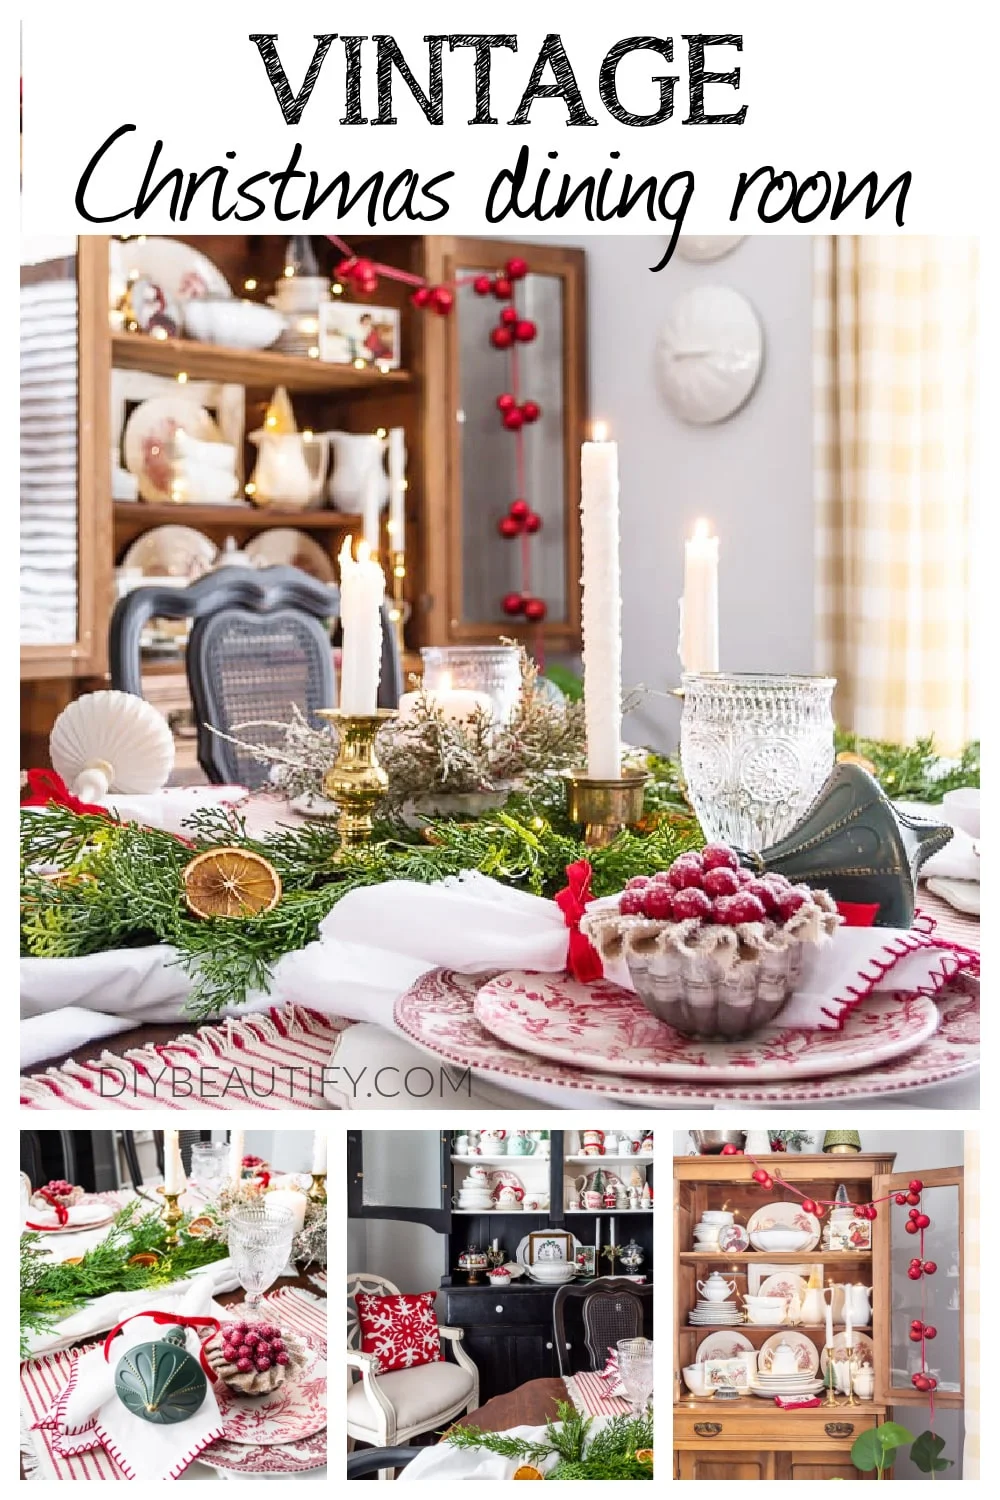 Christmas dining table decorated with vintage dishes, DIY ornaments, dried orange slices, cedar, brass candlesticks